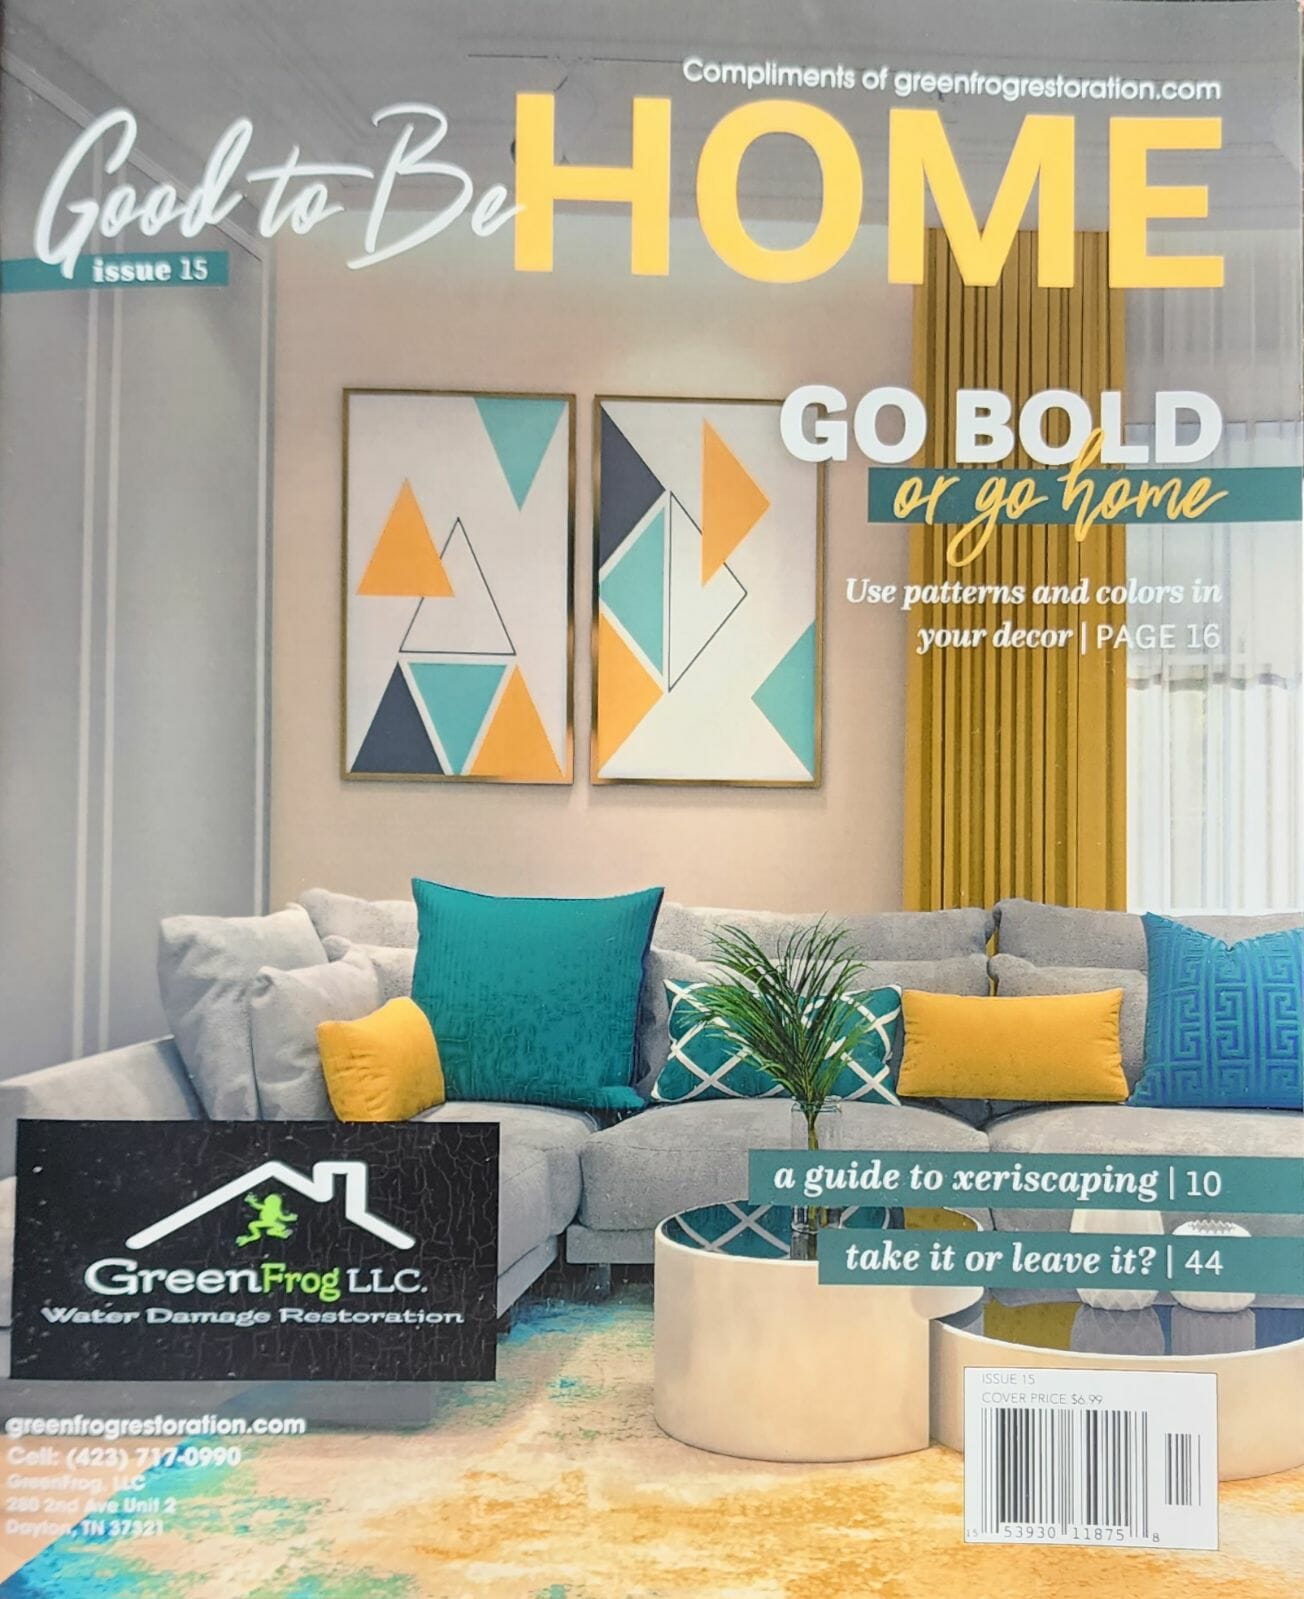 Good to be home magazine featuring GreenFrog LLC